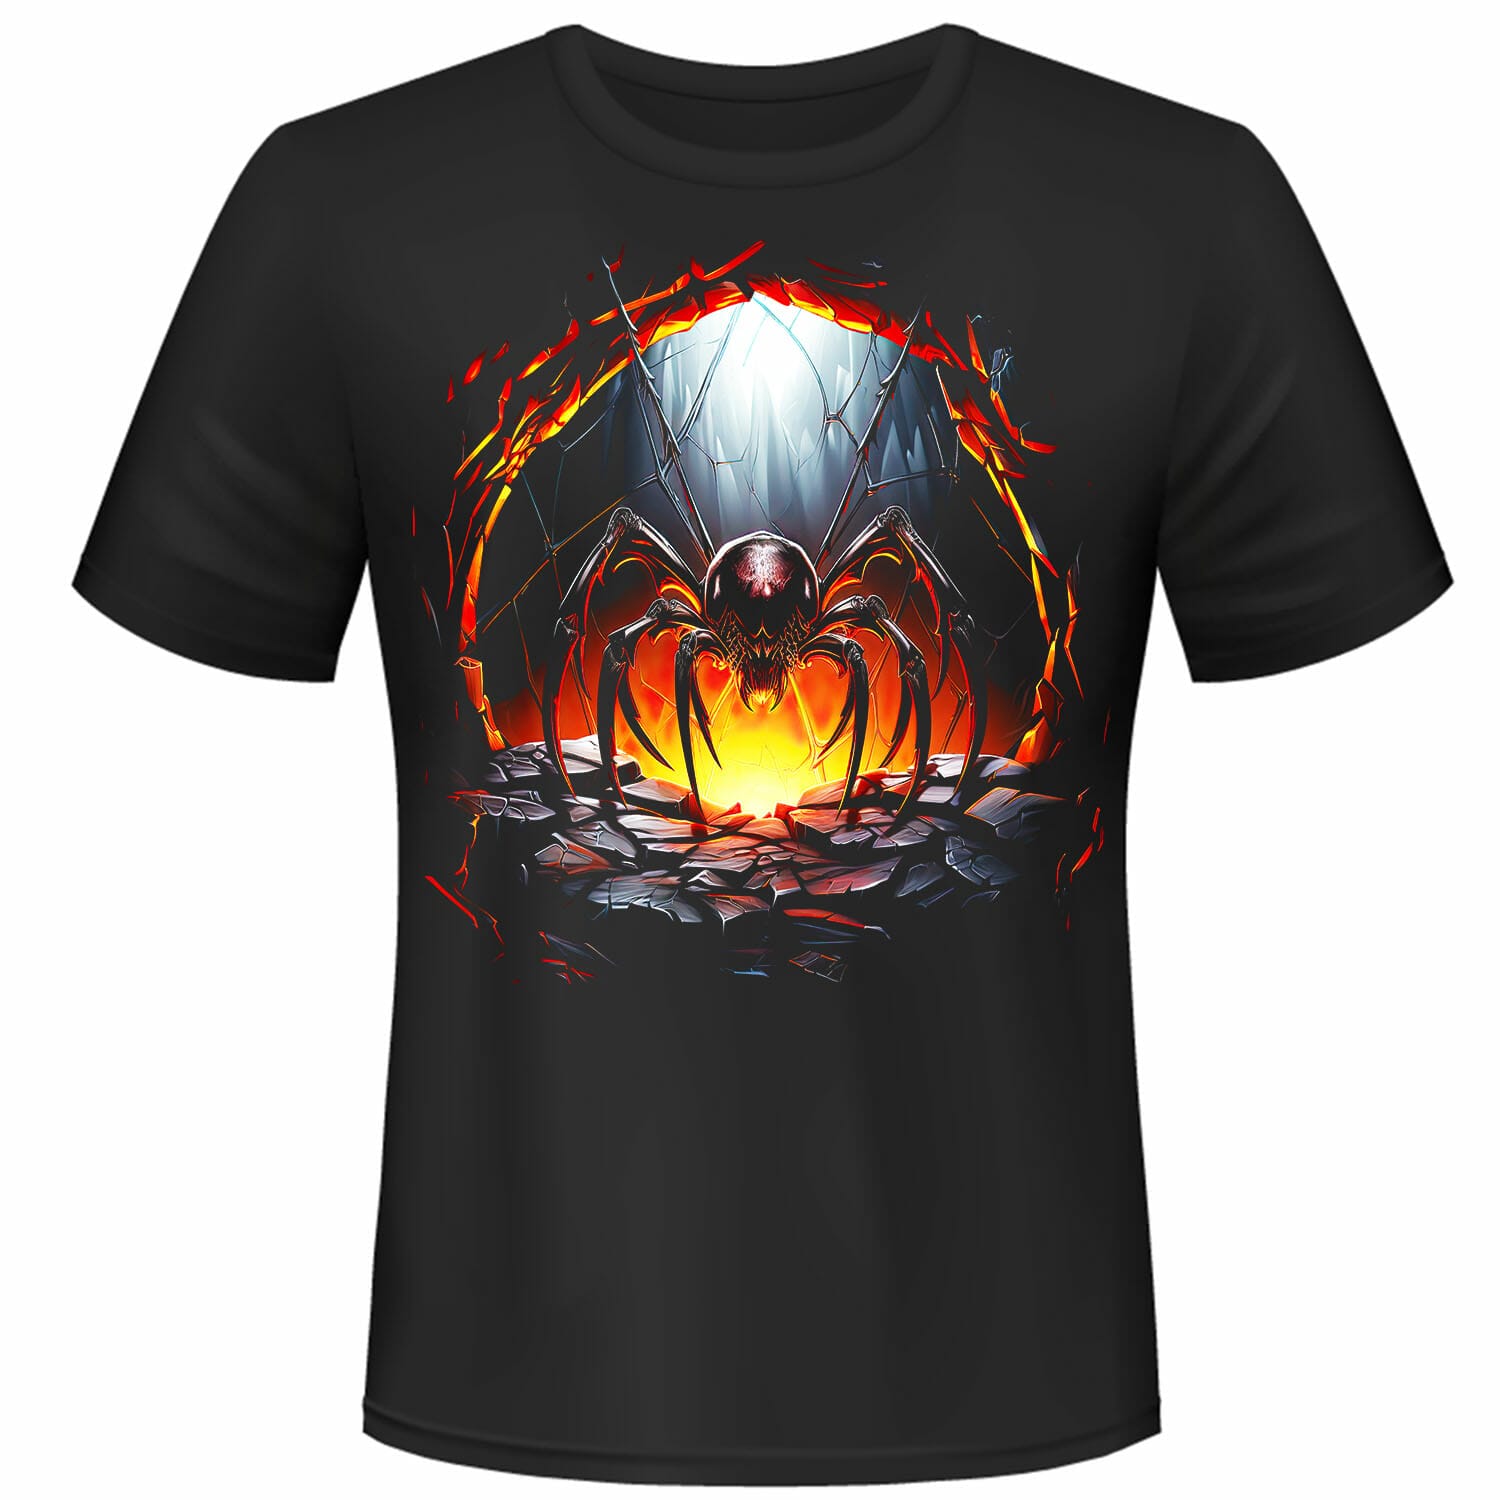 Spider In A Cave T-Shirt Design